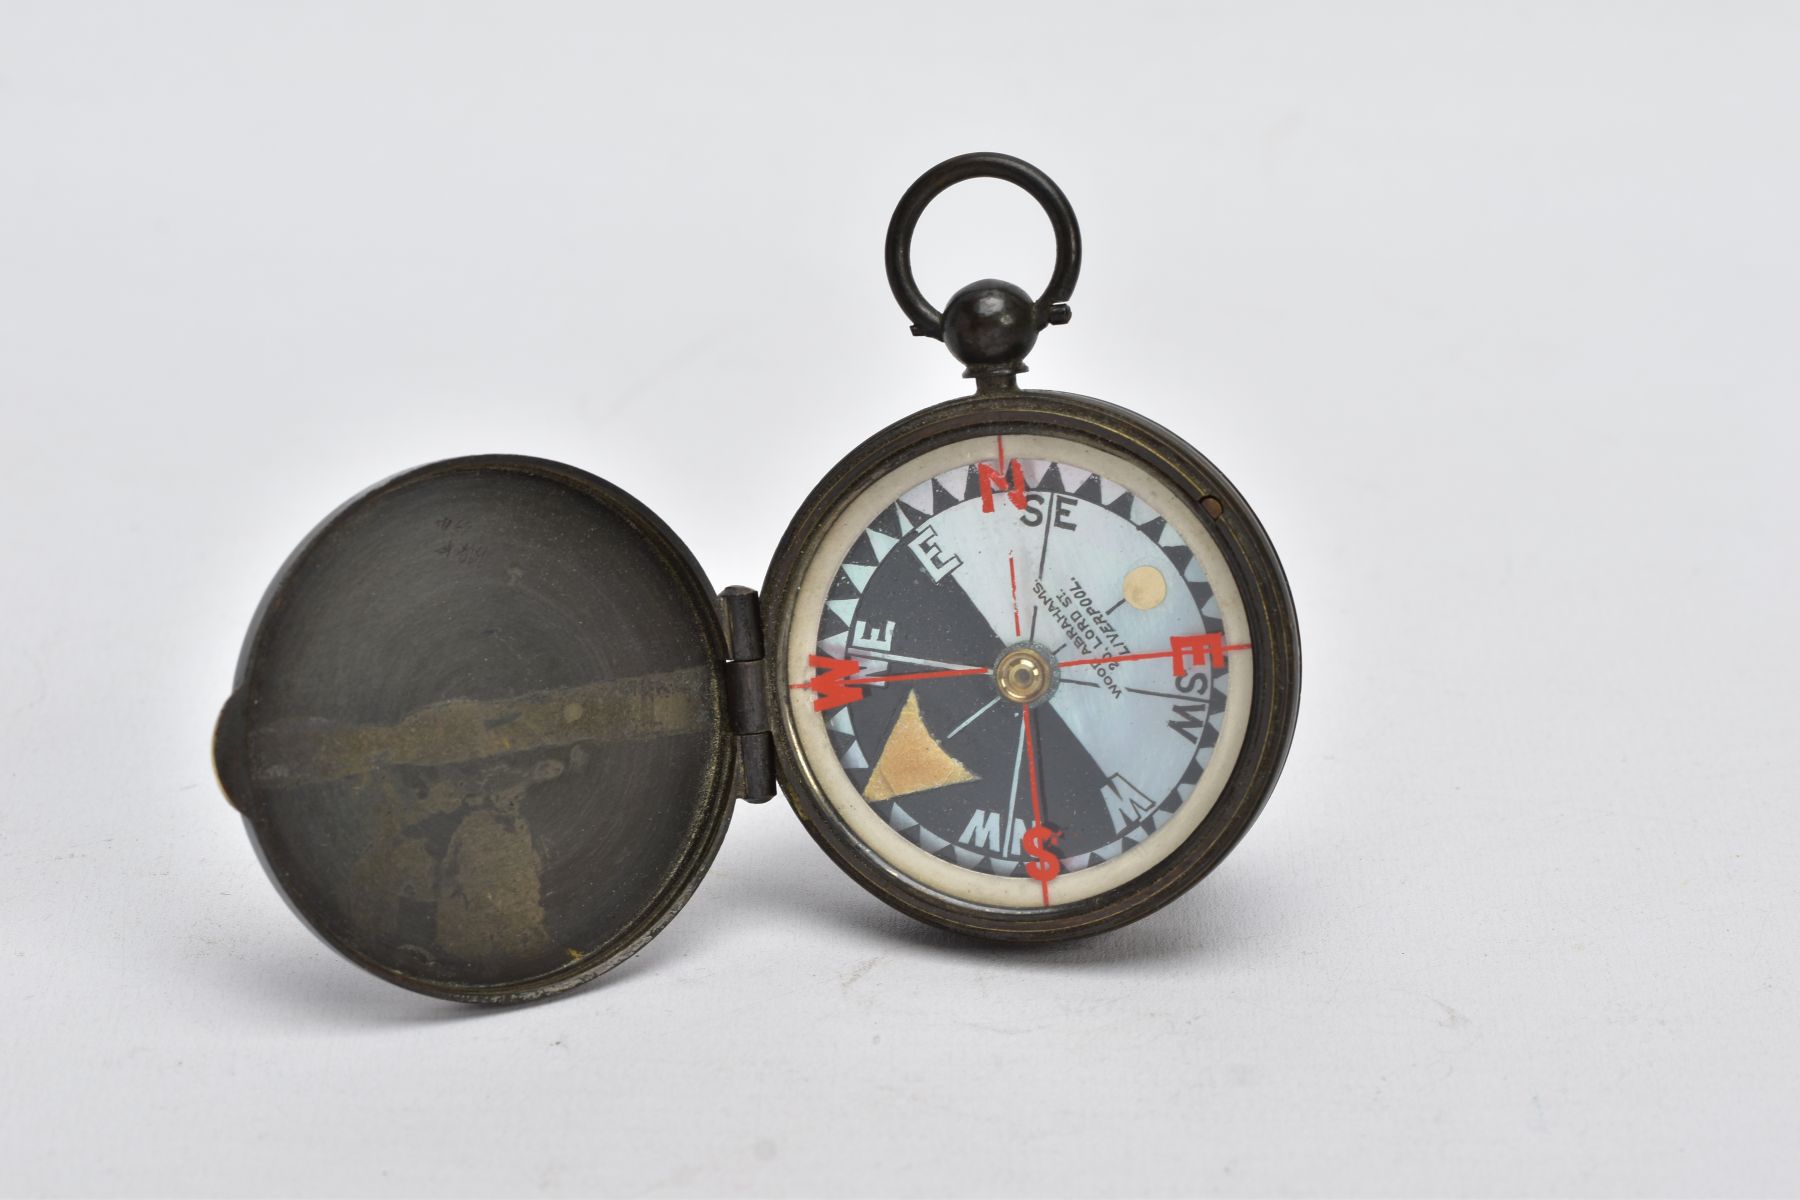 A 'WOOD ABRAHAMS' COMPASS, base metal compass, round mother of pearl dial, signed 'Wood Abrahams